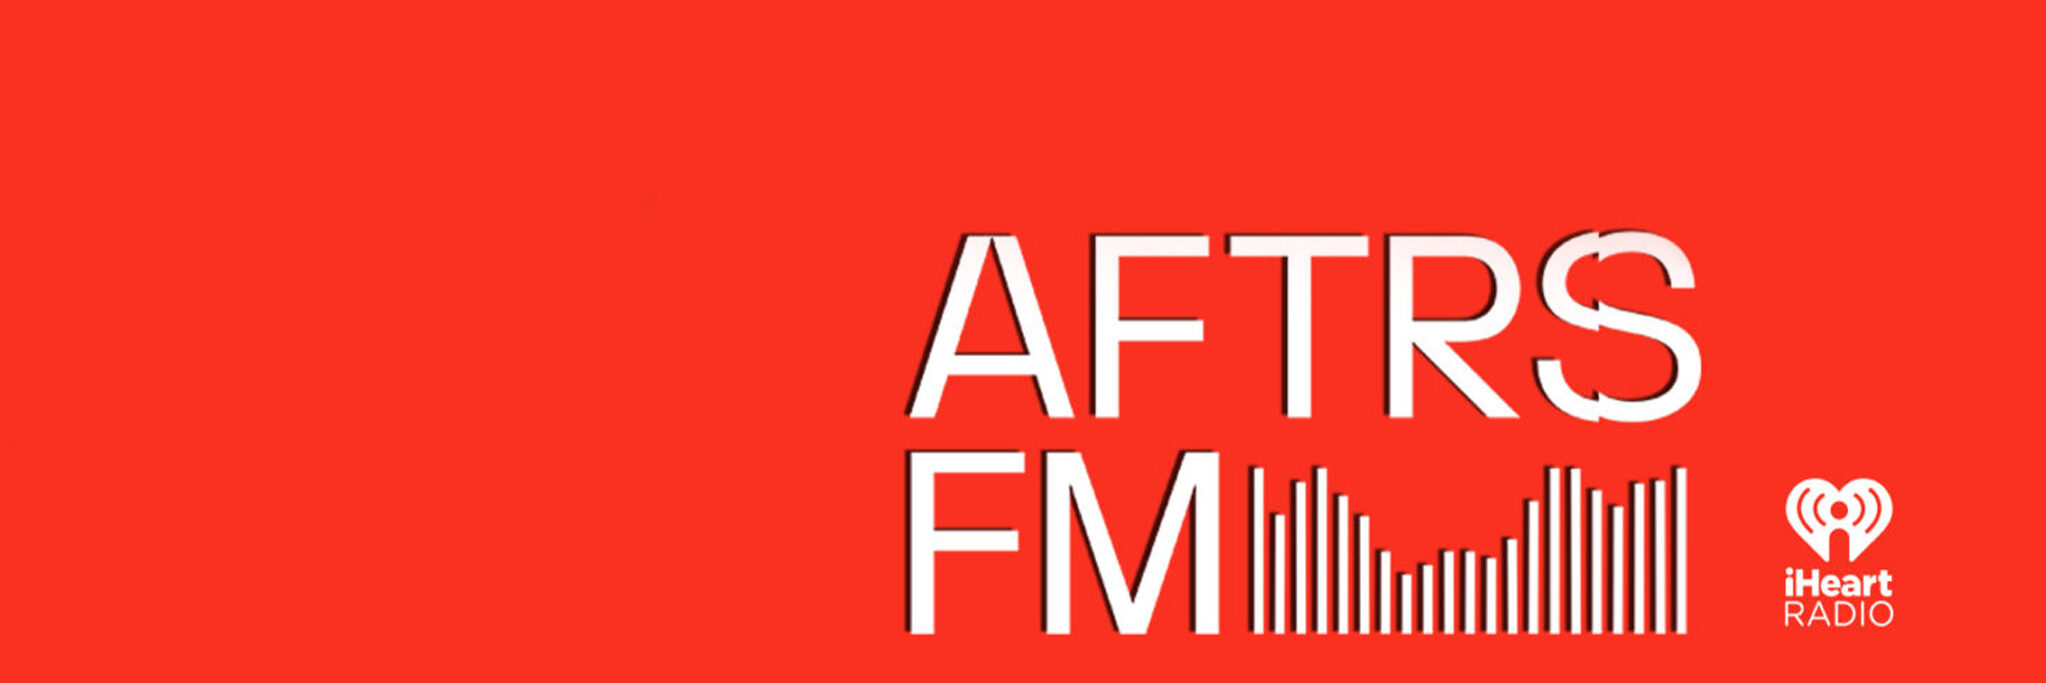 The AFTRS FM and iHeart logos, in white on a red background